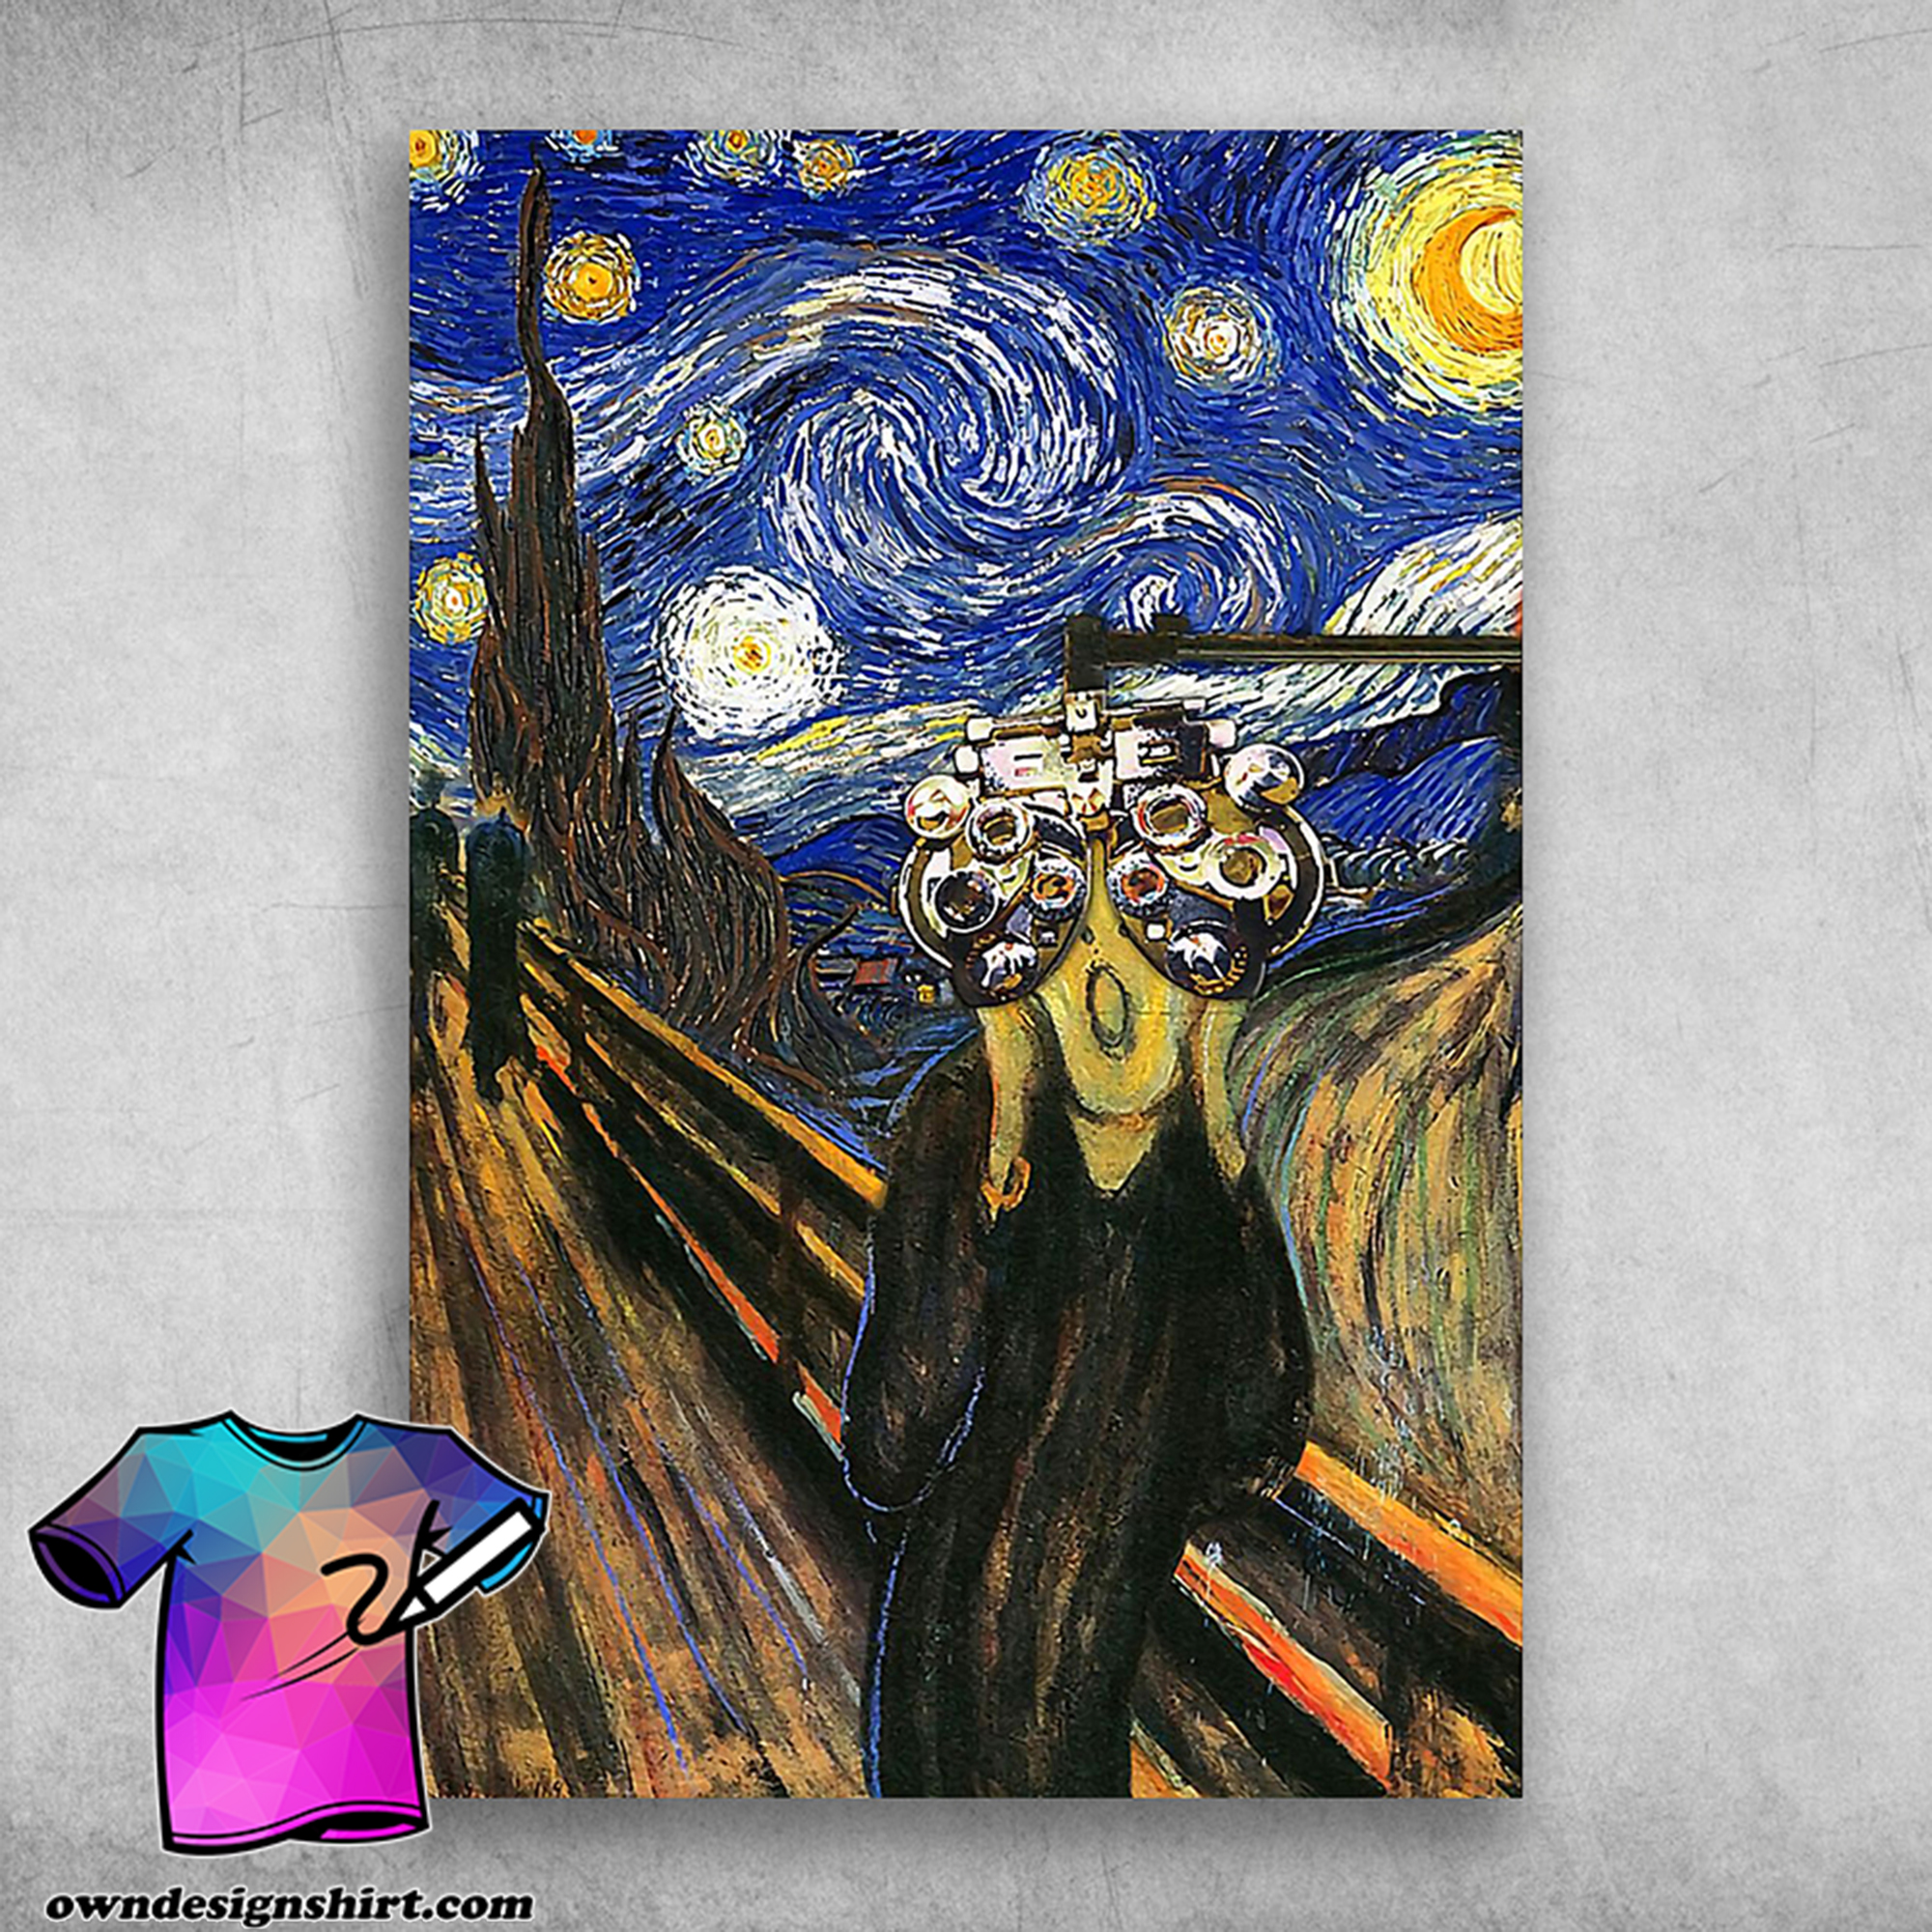 The starry night van gogh starry night oil painting poster